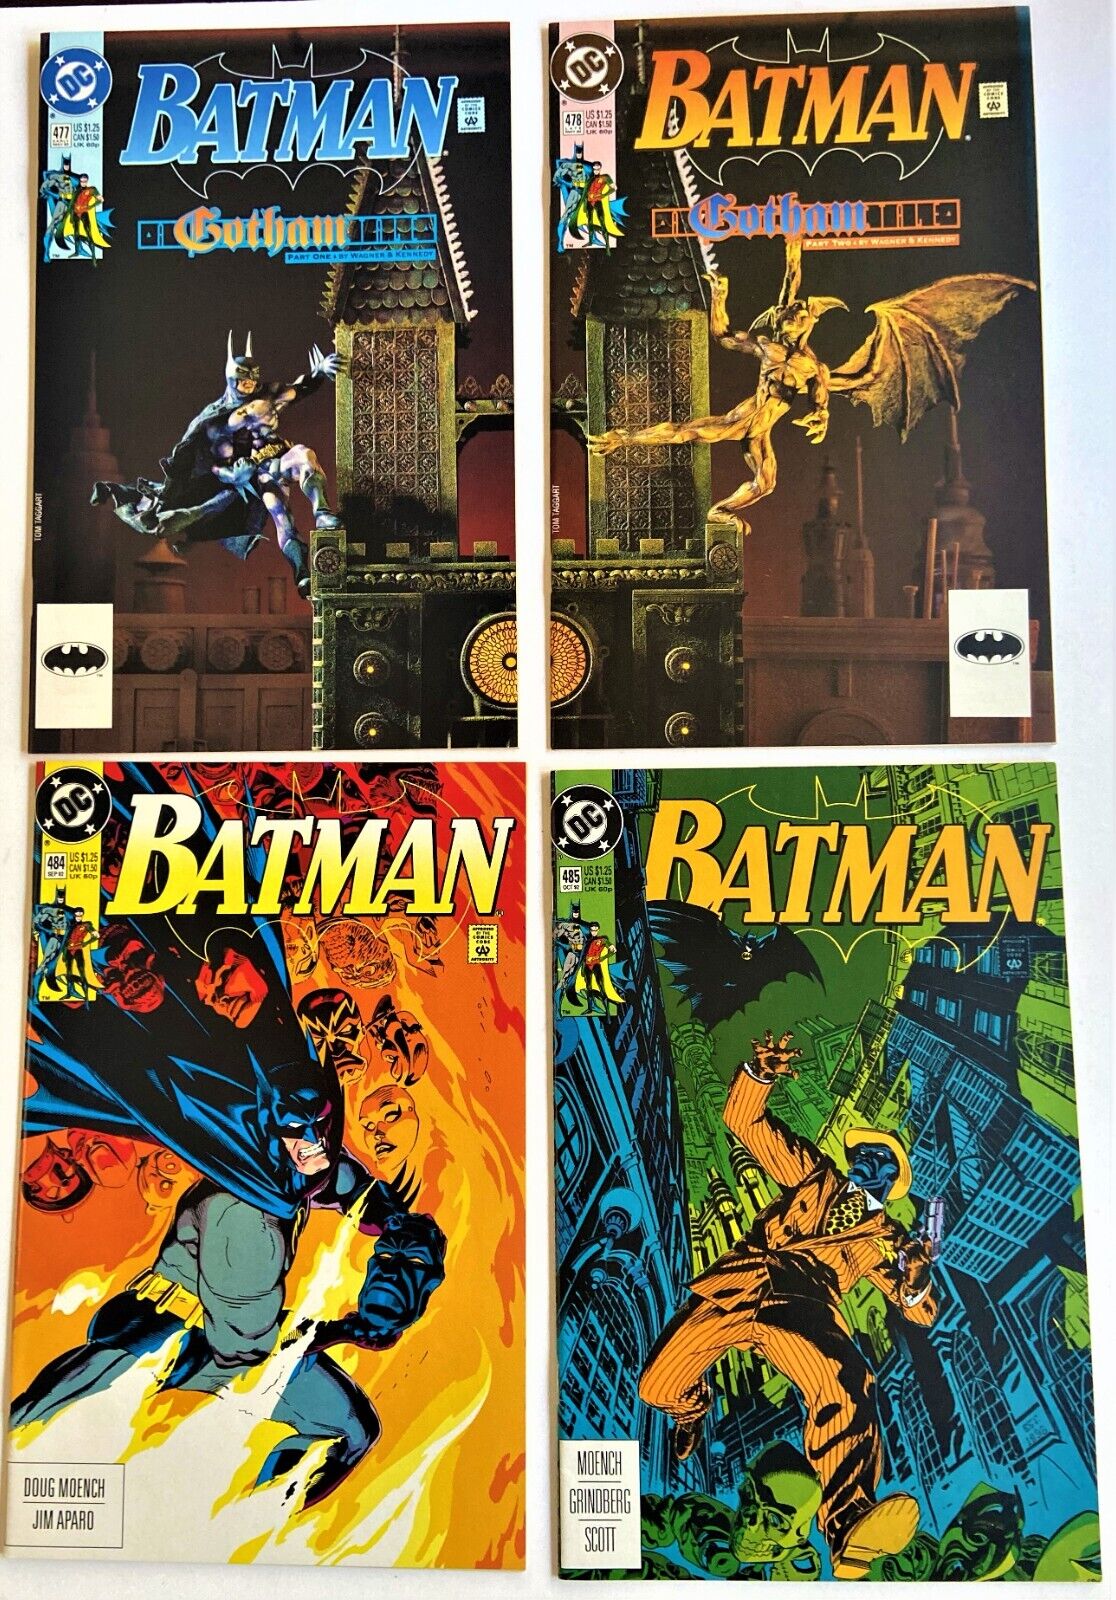 BATMAN #477 #478 PLUS #484 AND #485  TWO COMPLETE STORY ARCS